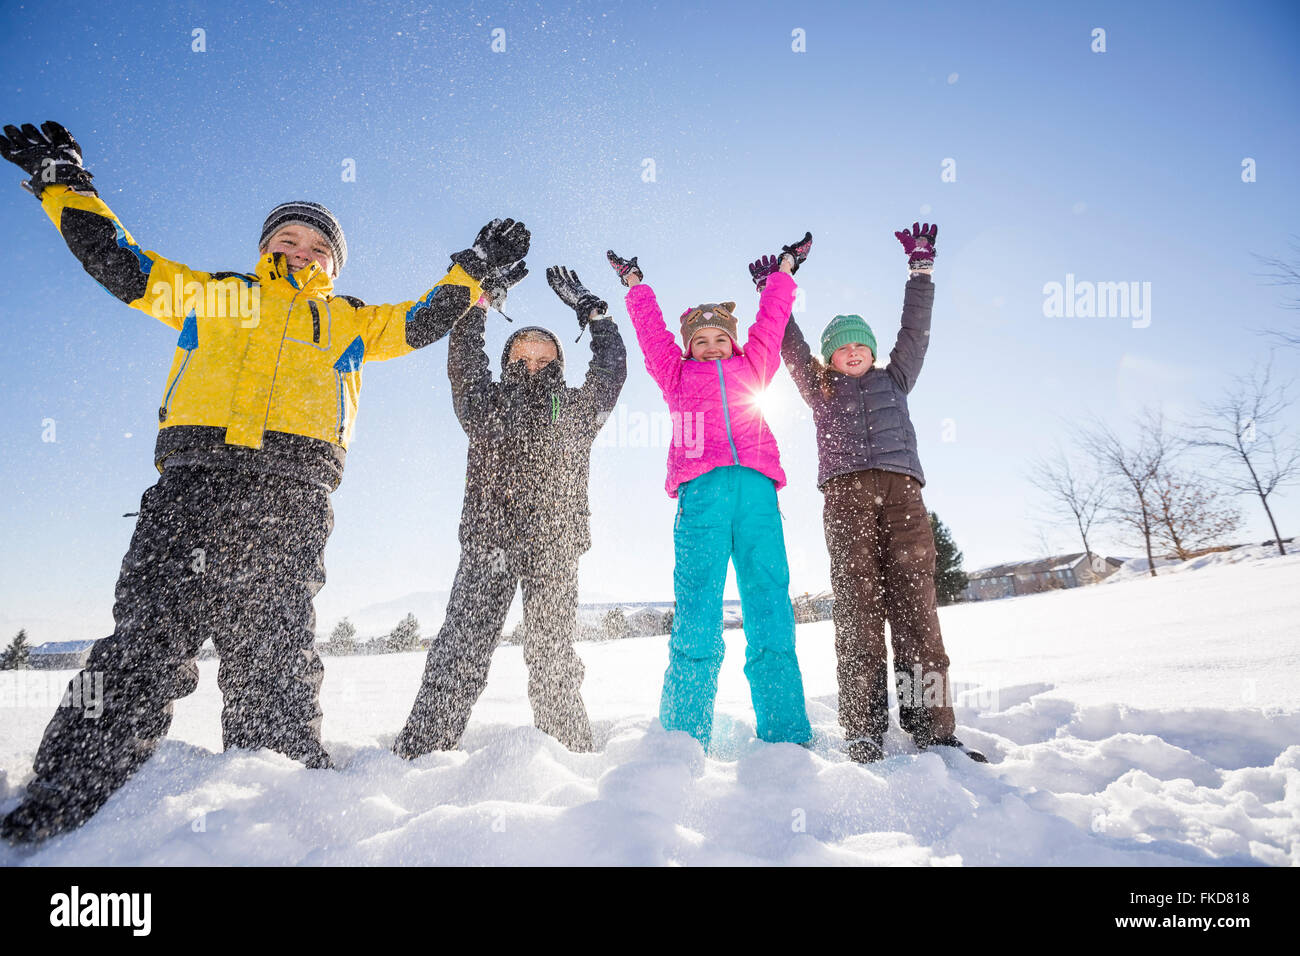 Children (8-9, 10-11) standing in snow with arms raised Stock Photo